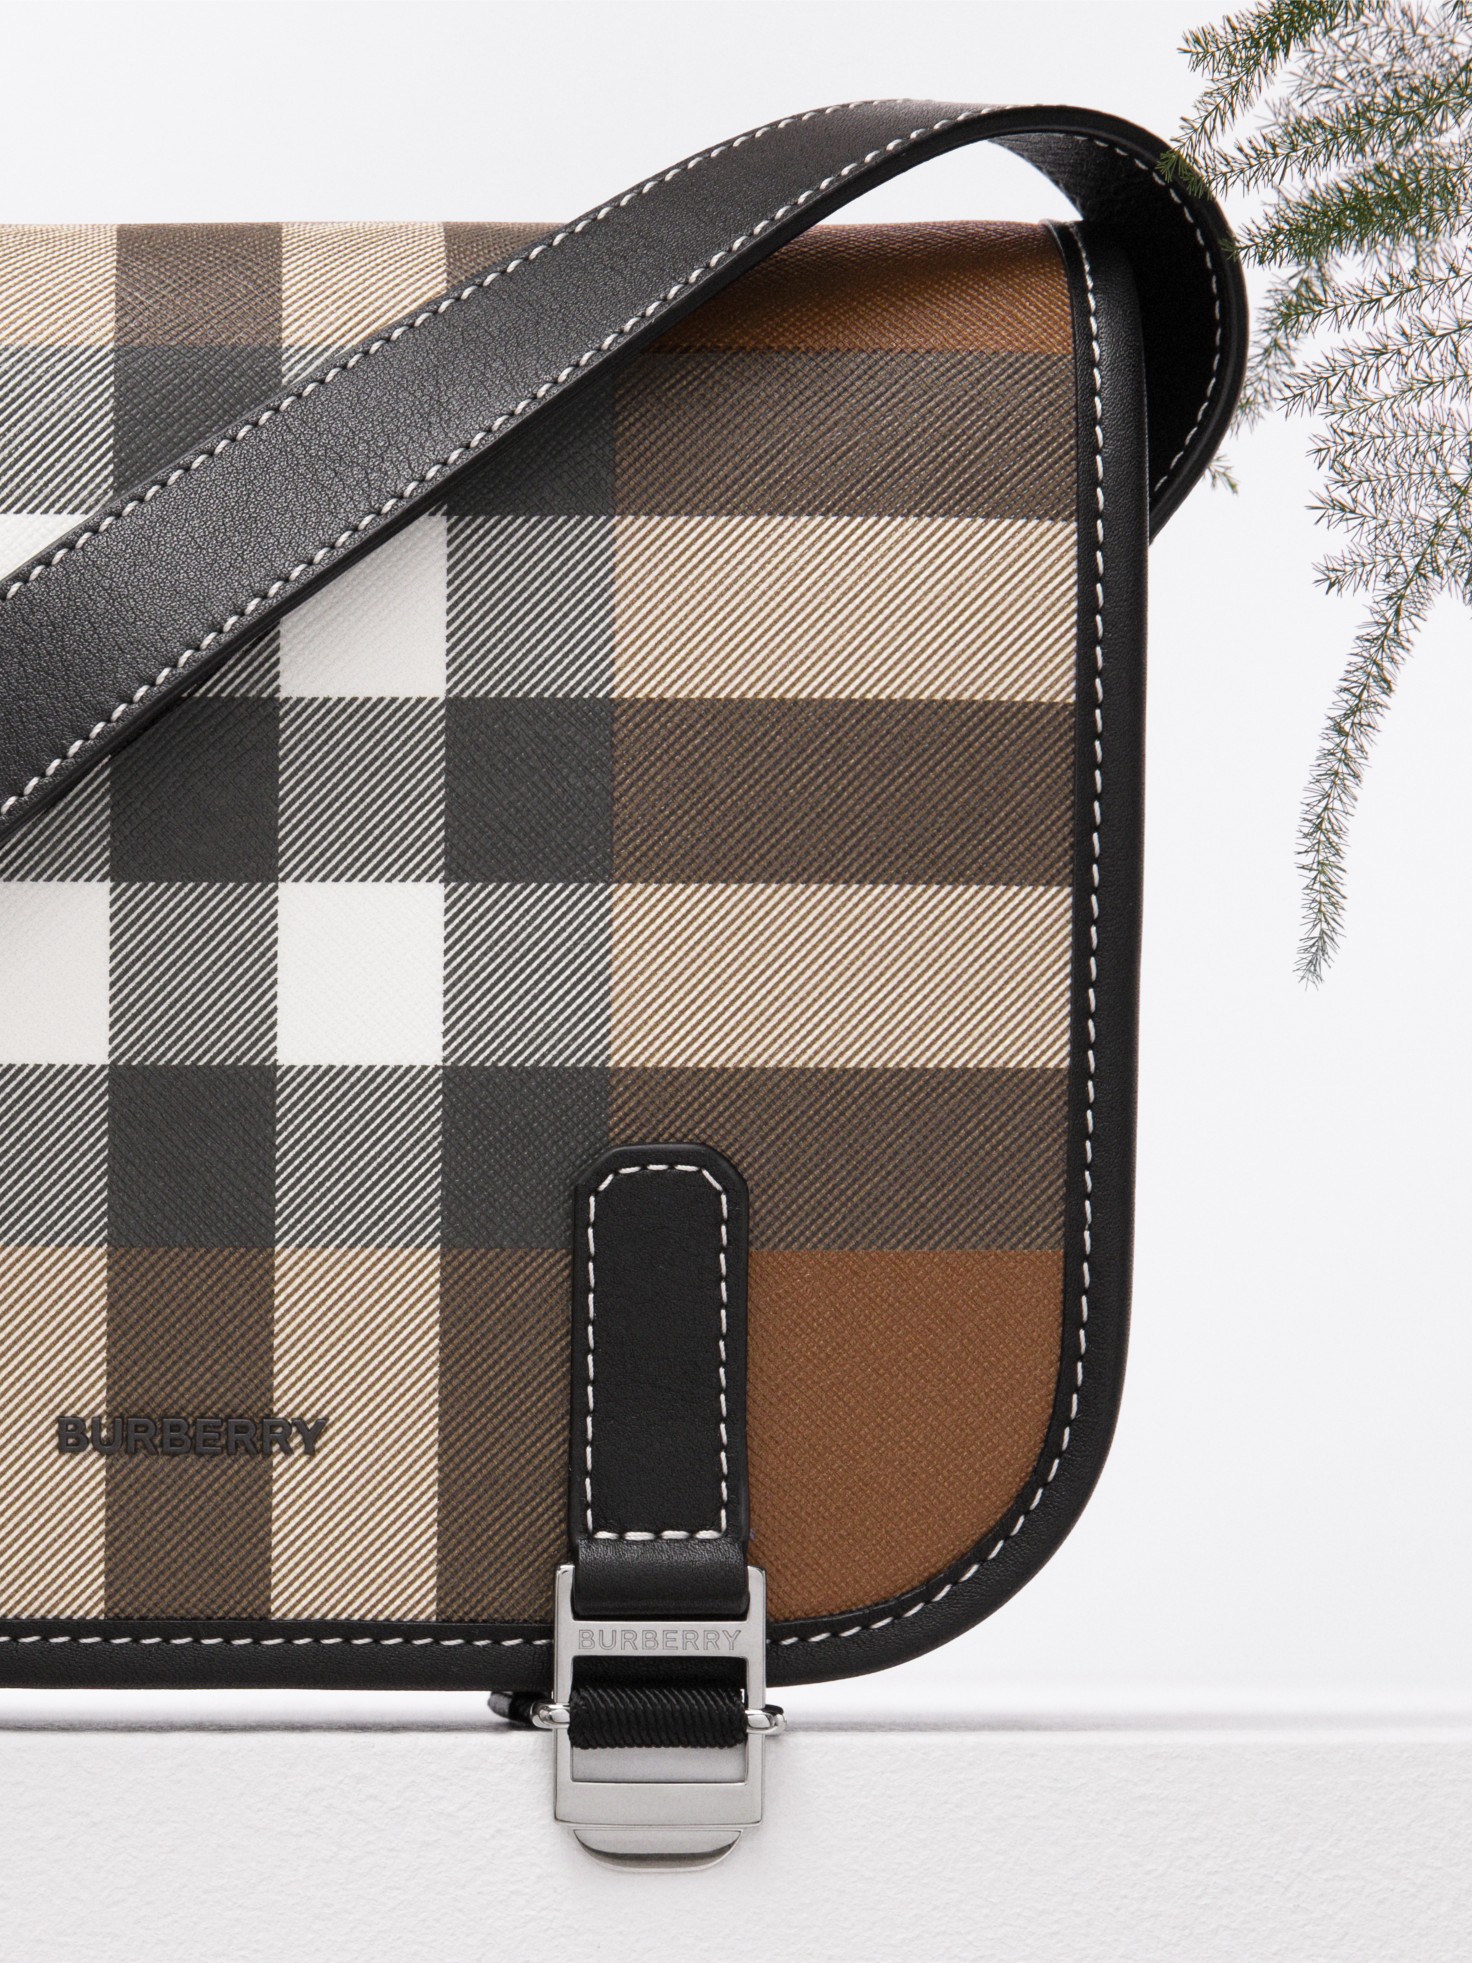 Men’s Bags | Check & Leather Bags for Men | Burberry® Official